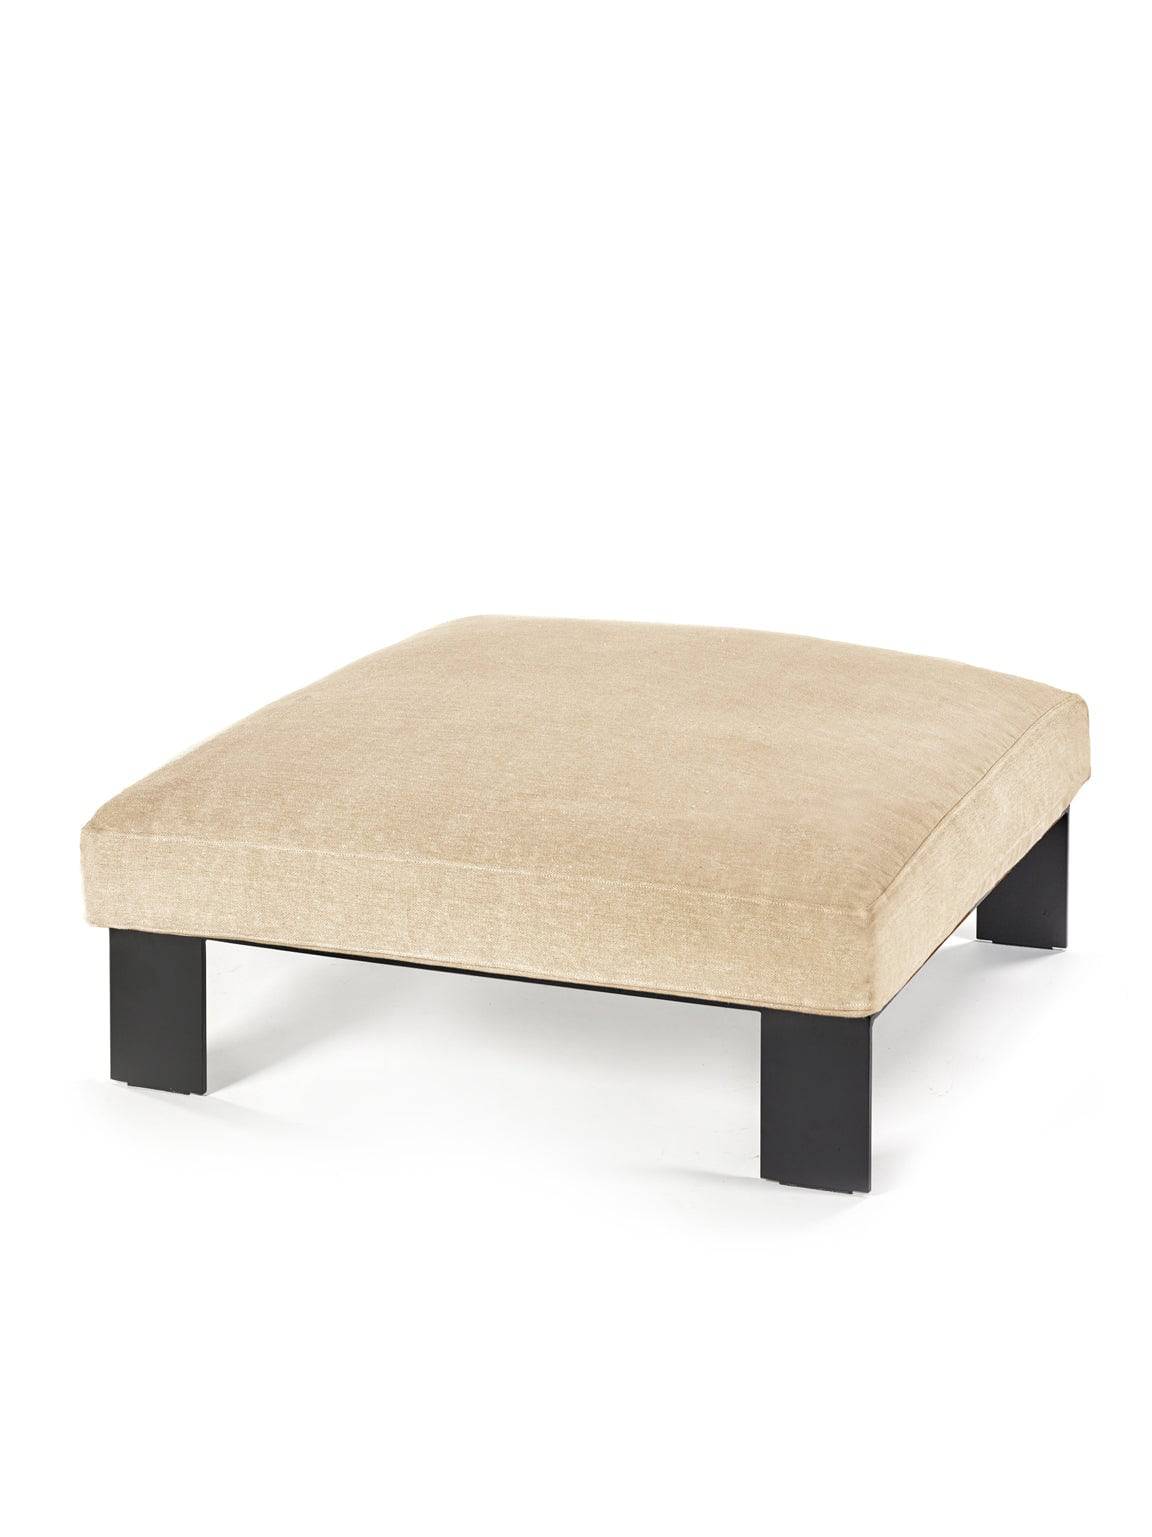 Mombaers Ottoman - Apricot - THAT COOL LIVING